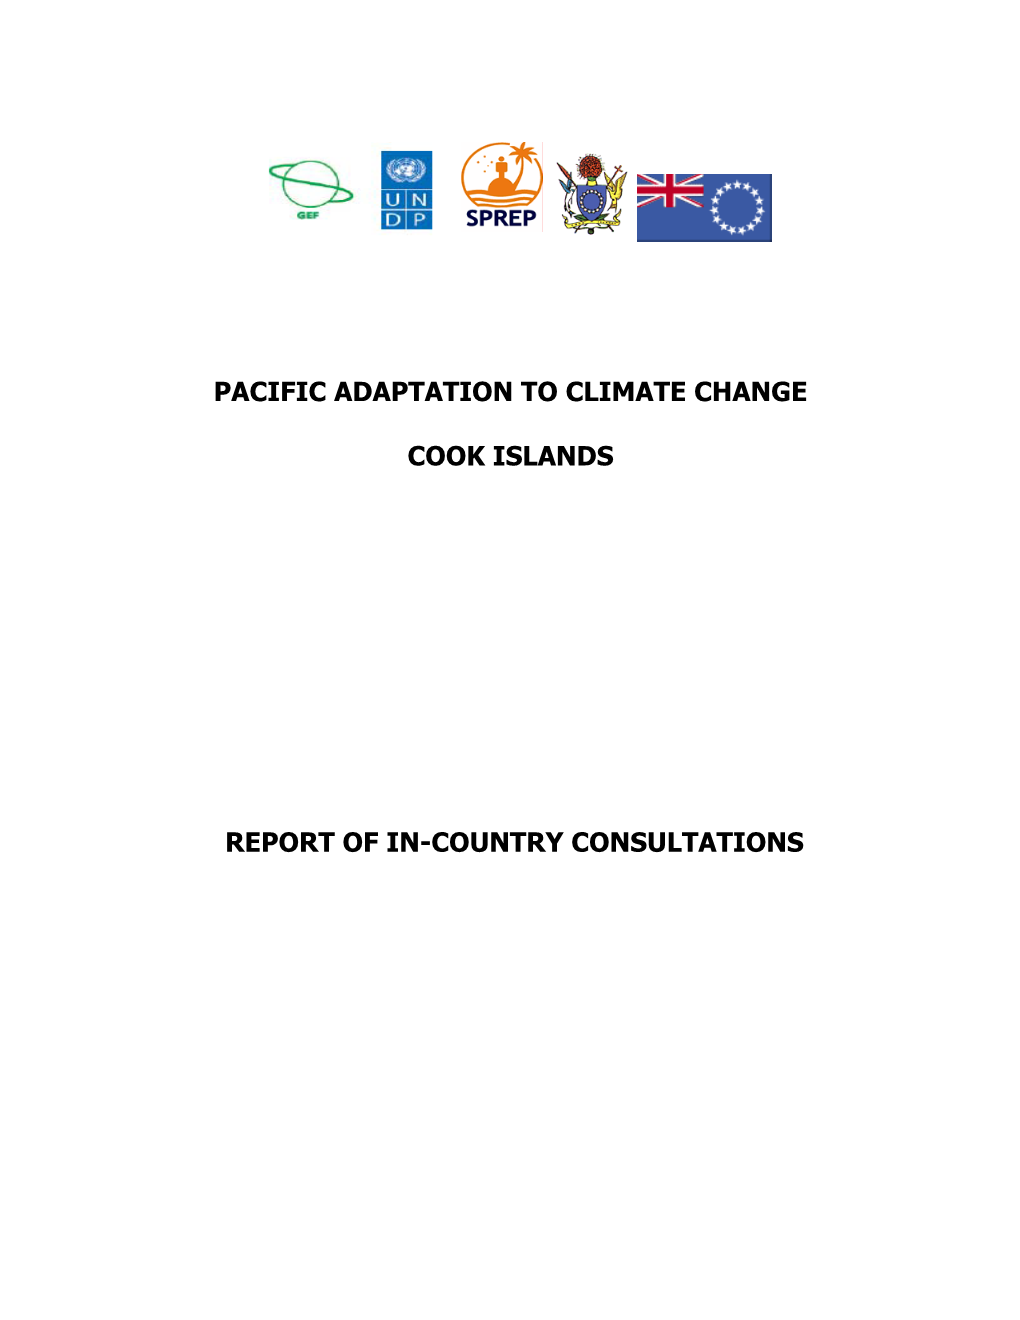 Pacific Adaptation to Climate Change Cook Islands Report of In-Country